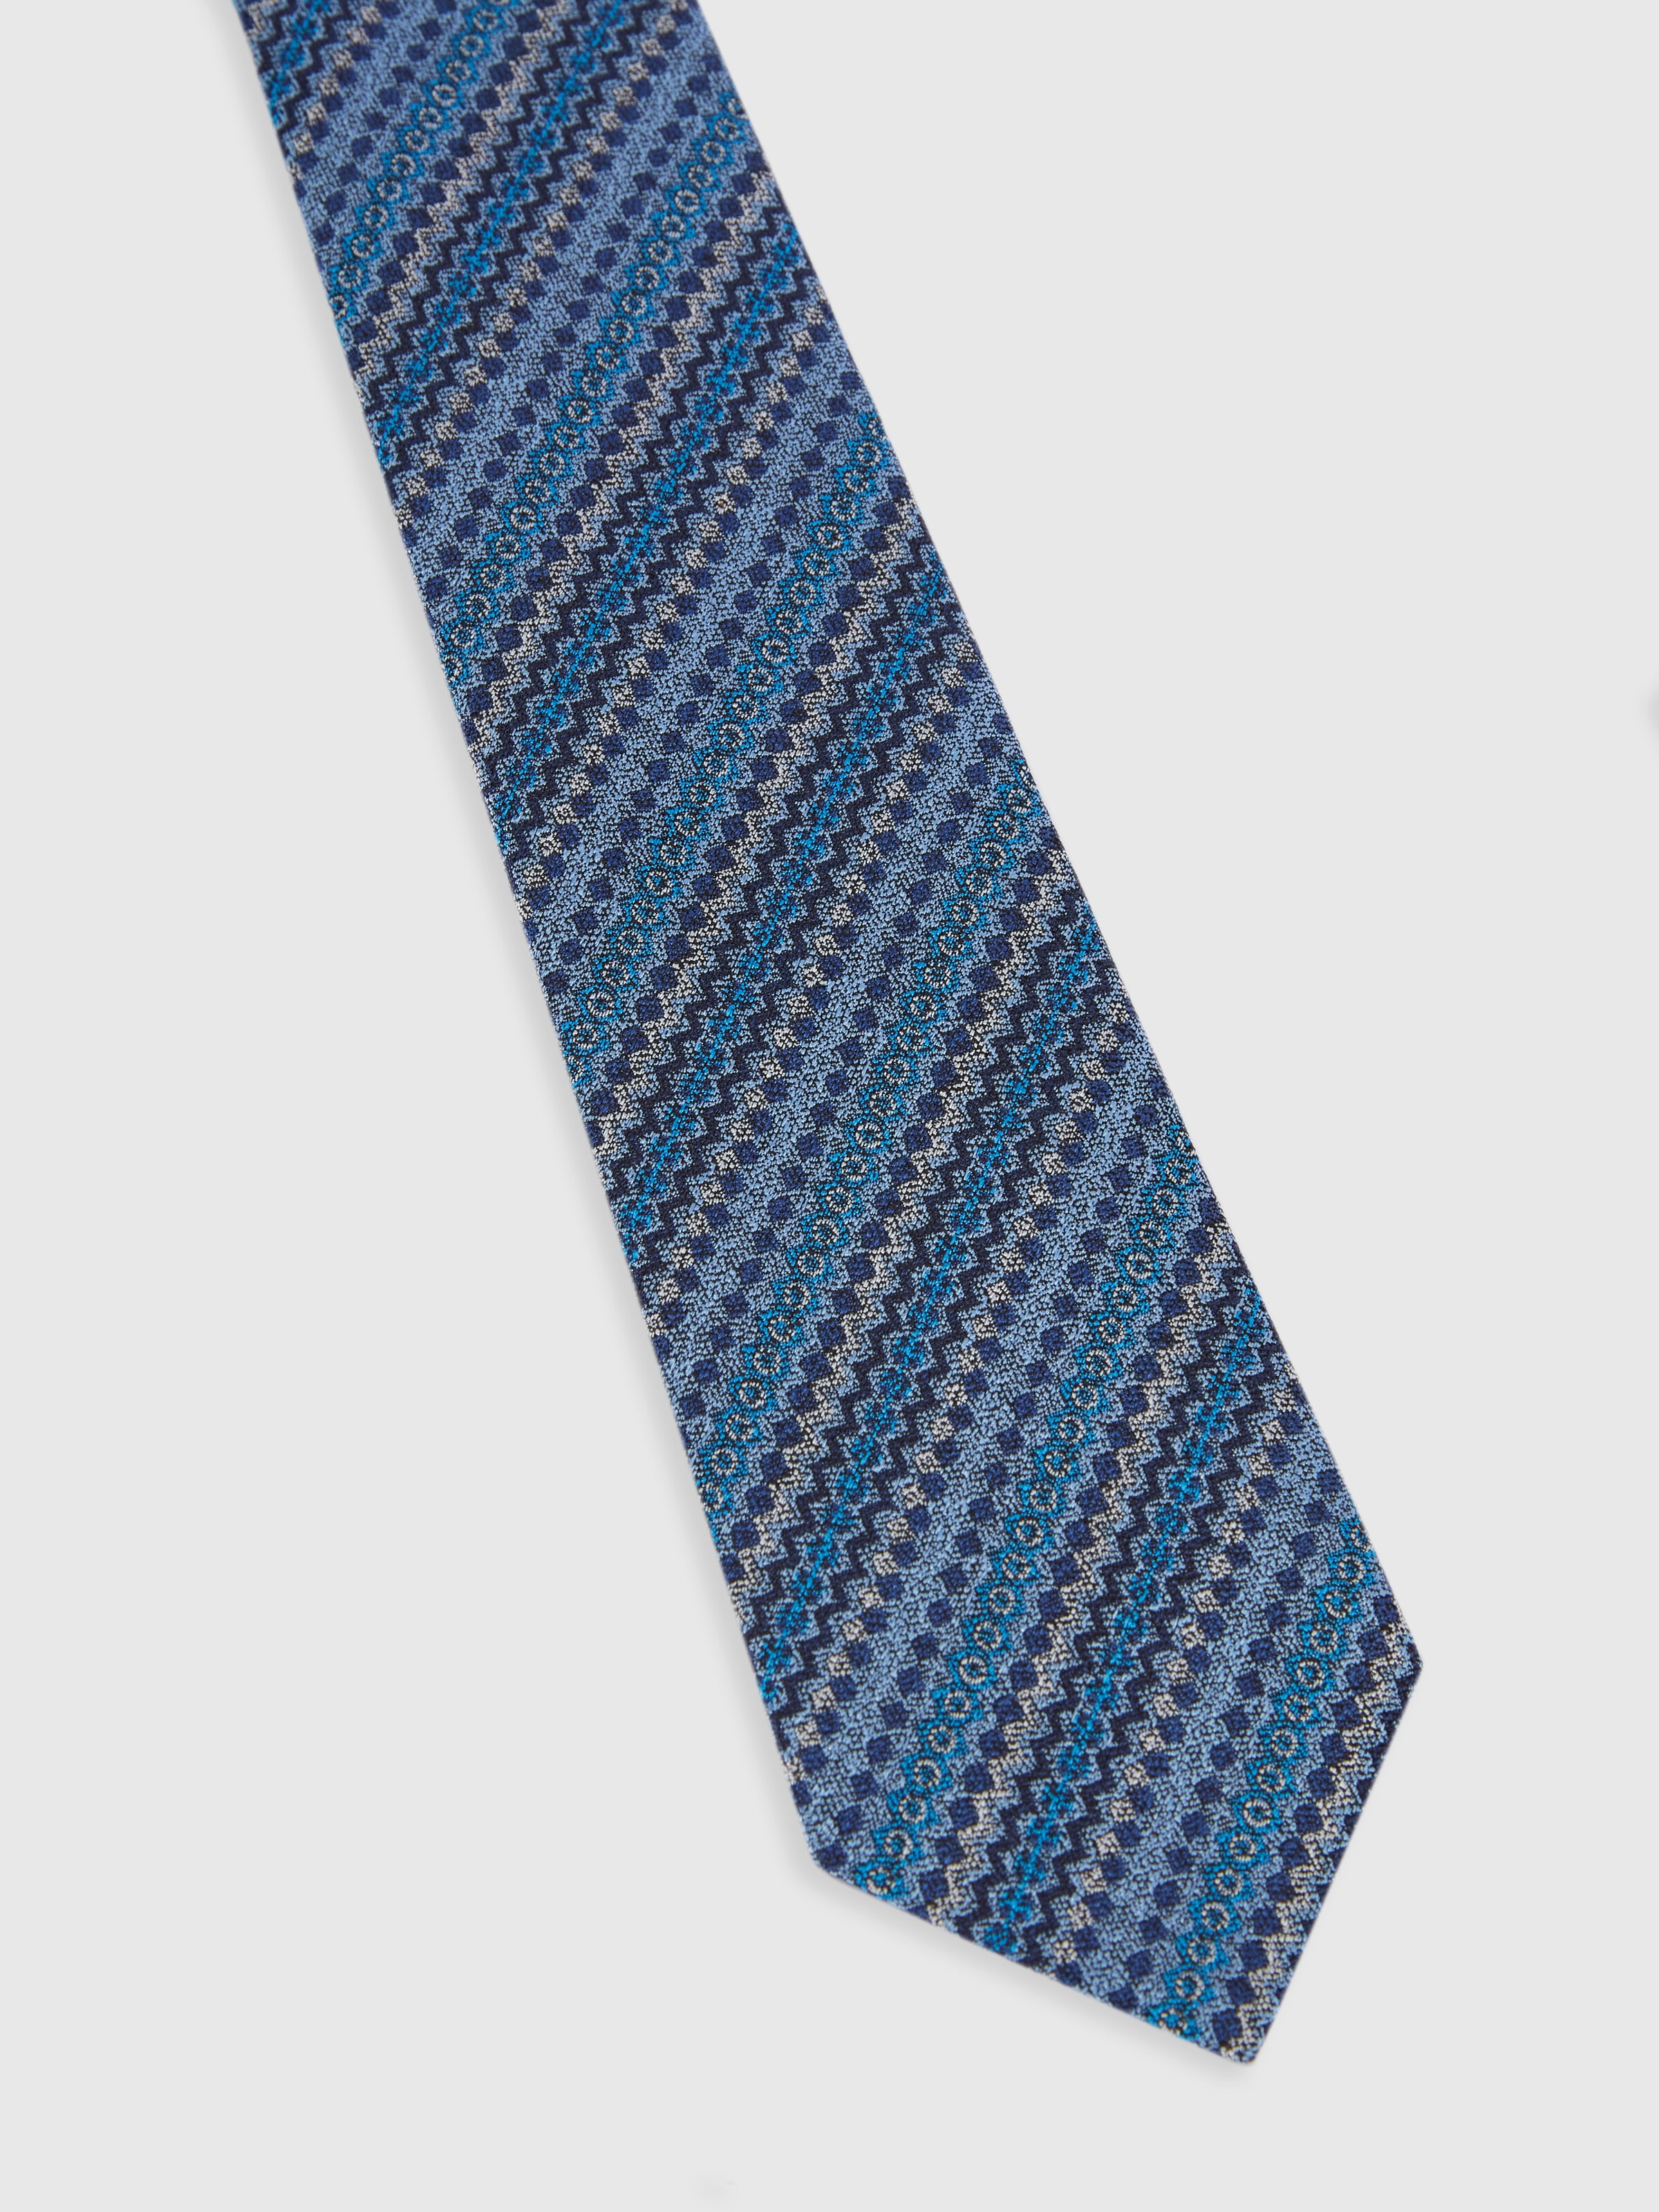 Silk tie knitted with multiple techniques , Multicoloured  - 1